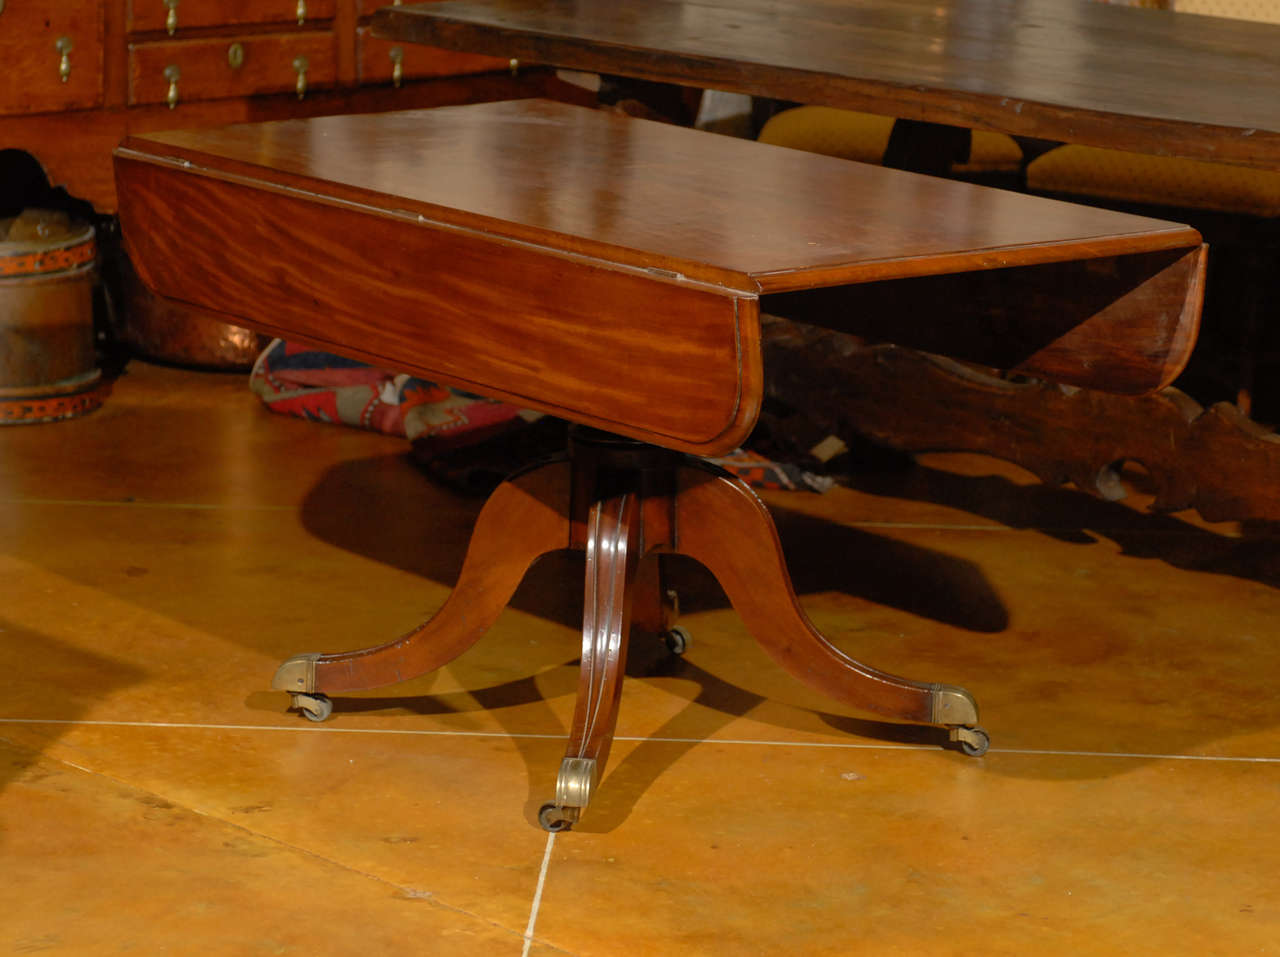 Georgian mahogany drop-leaf table with shaped legs terminating in brass feet and castors, England, circa 1790.

52